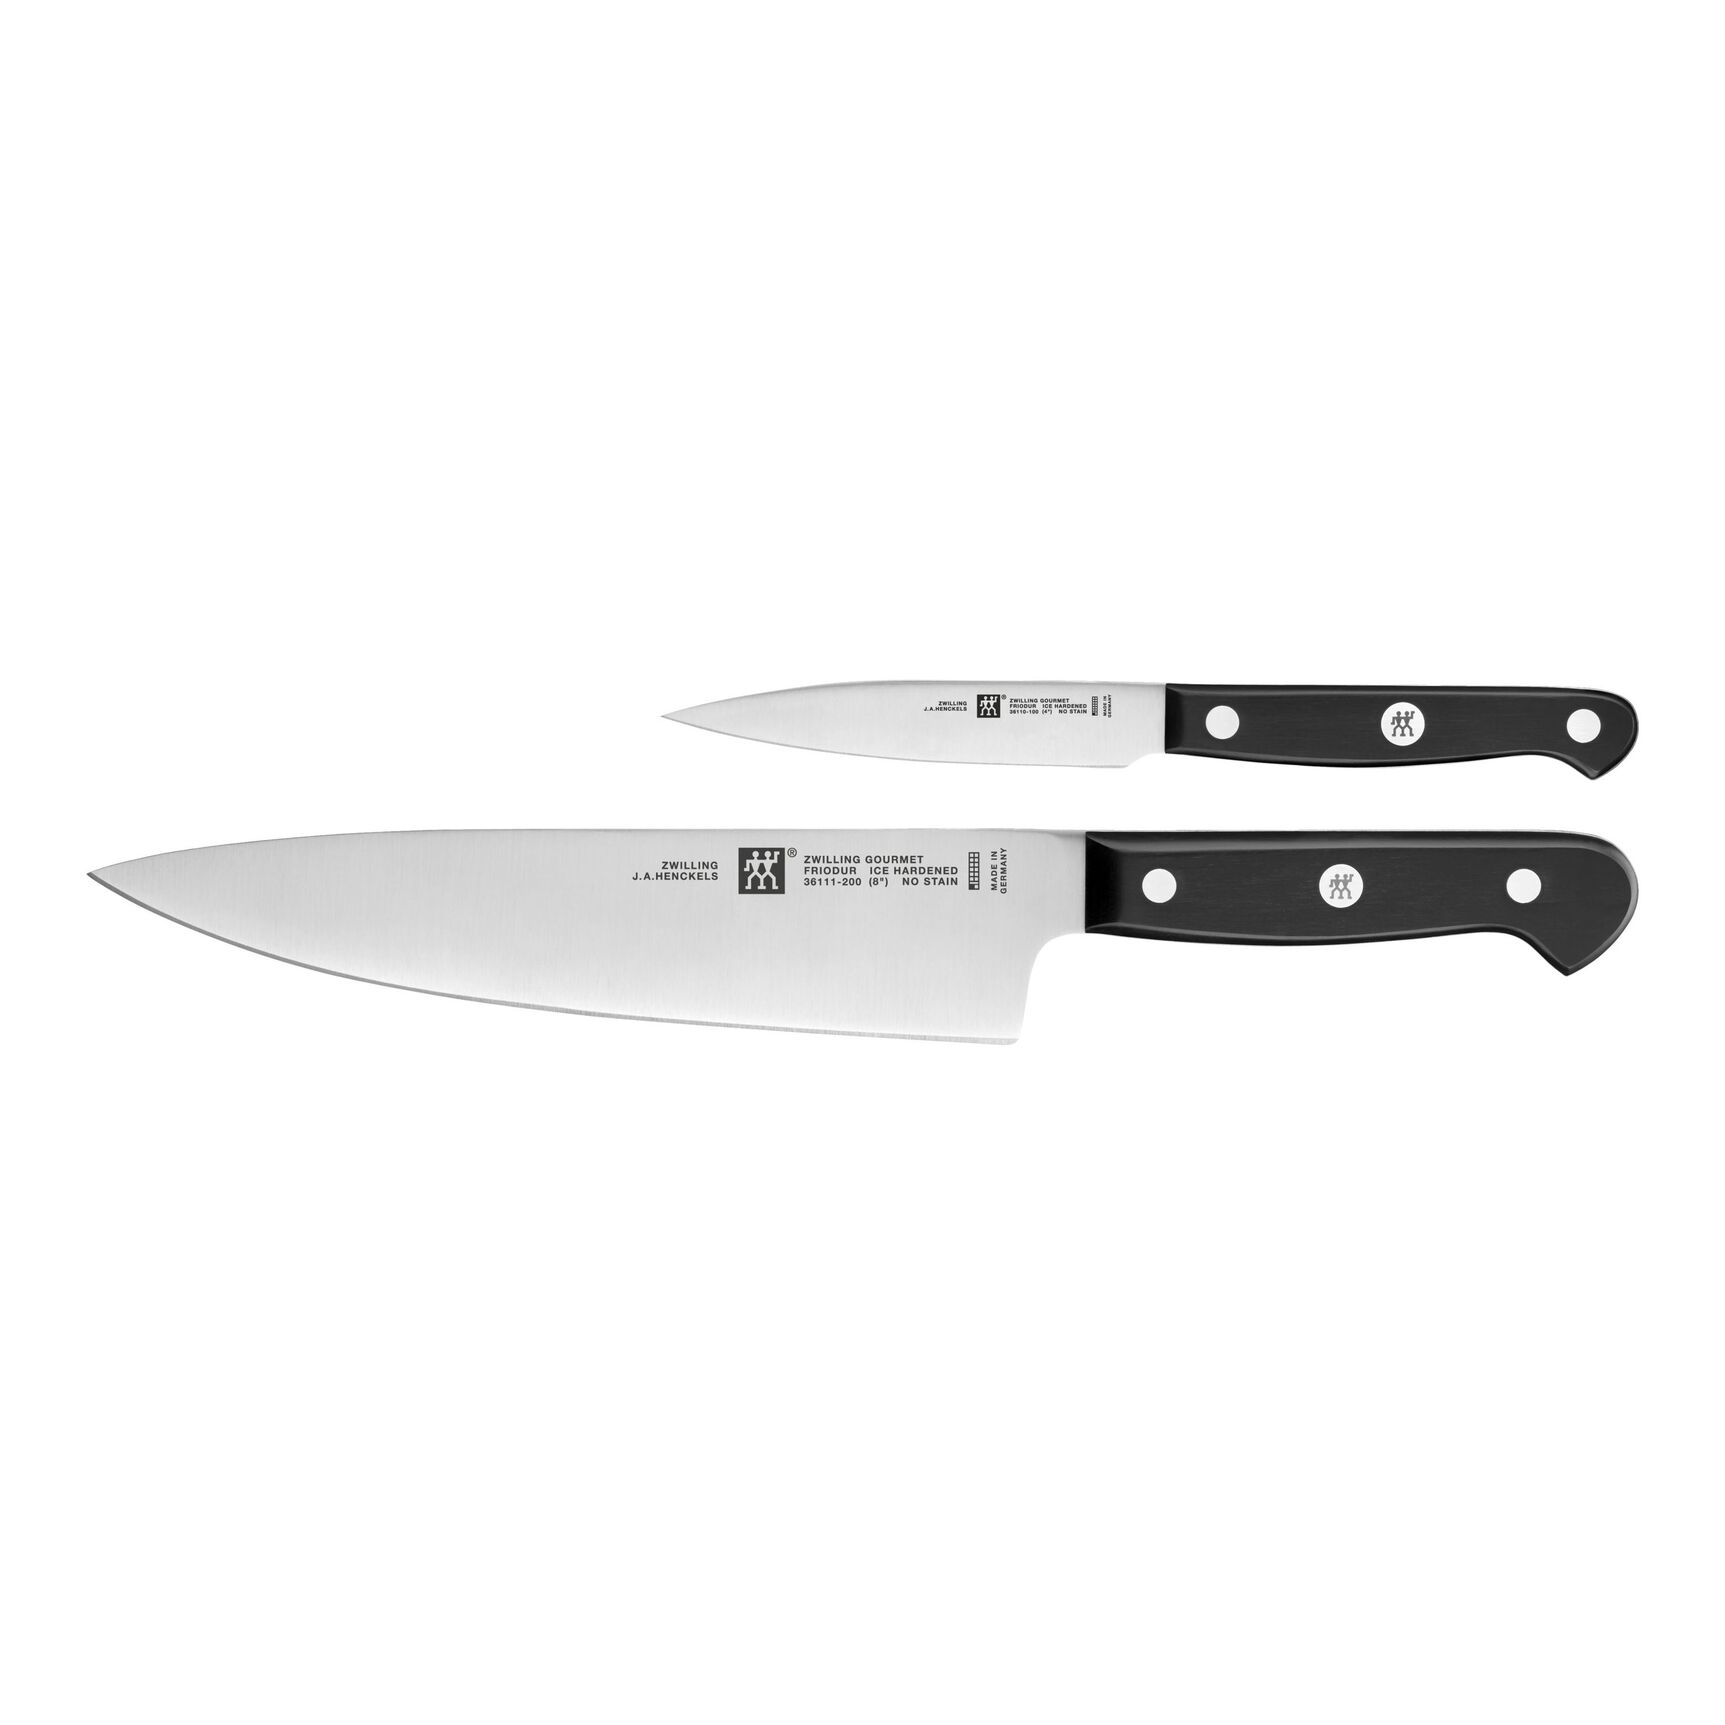 Zwilling Gourmet Knife Set 2 Pieces